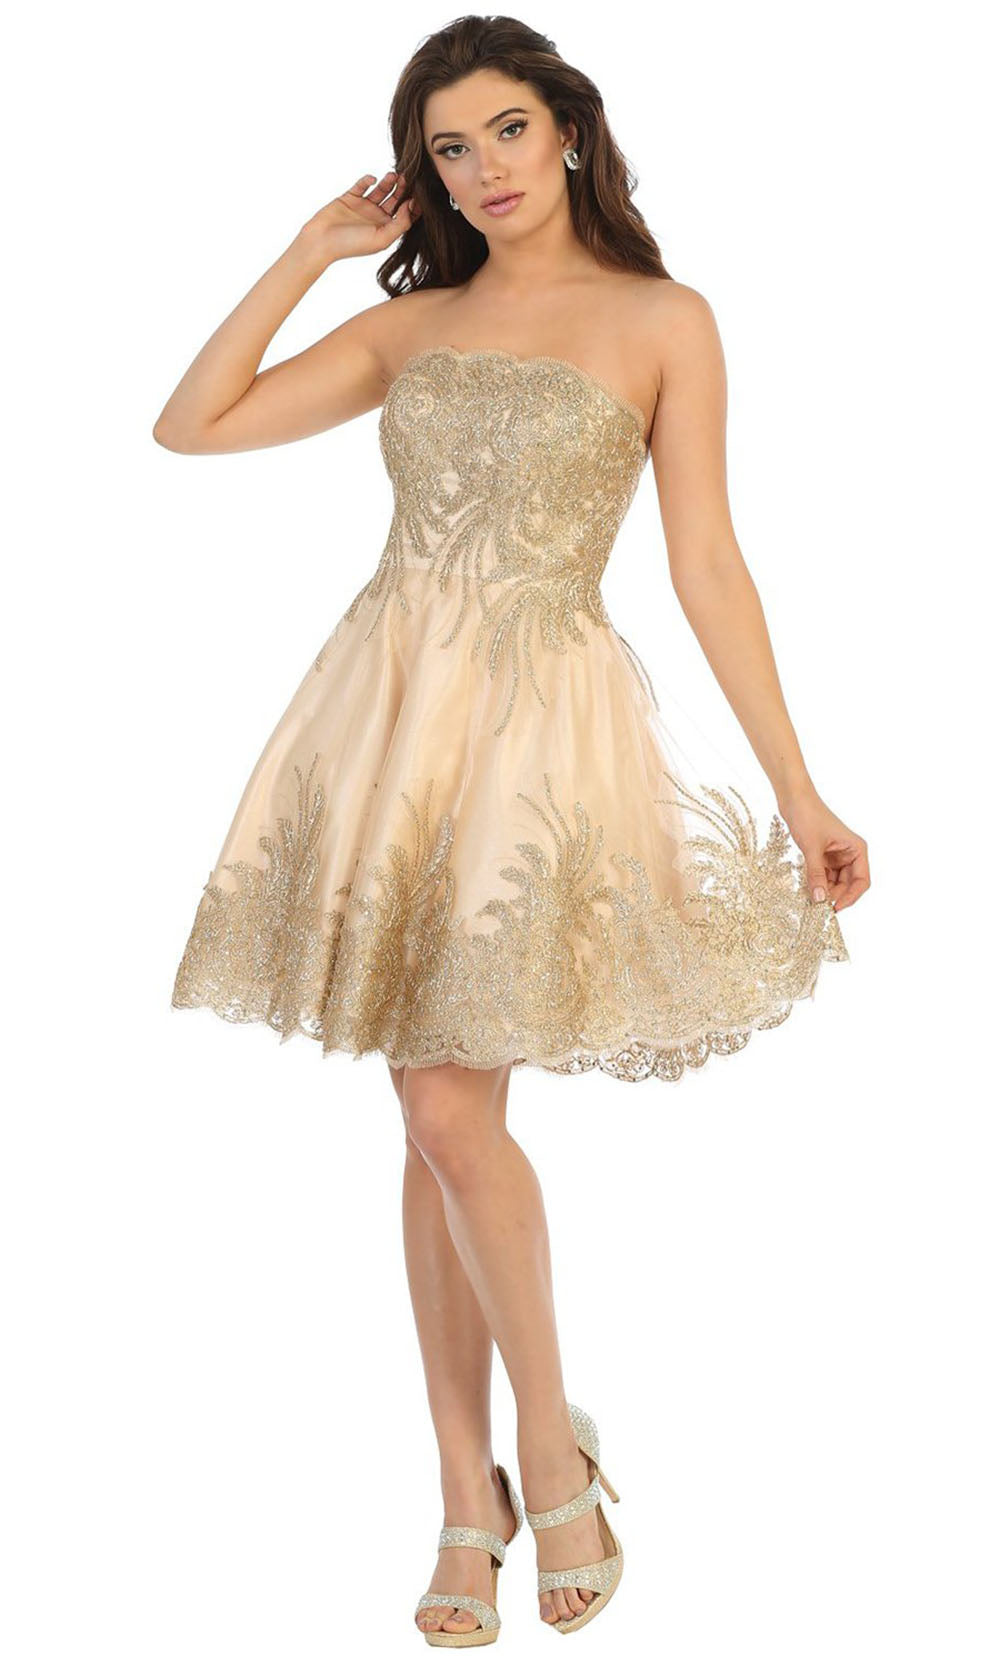 May Queen - MQ1650 Bateau Neck Beaded Embroided Dress In Neutral